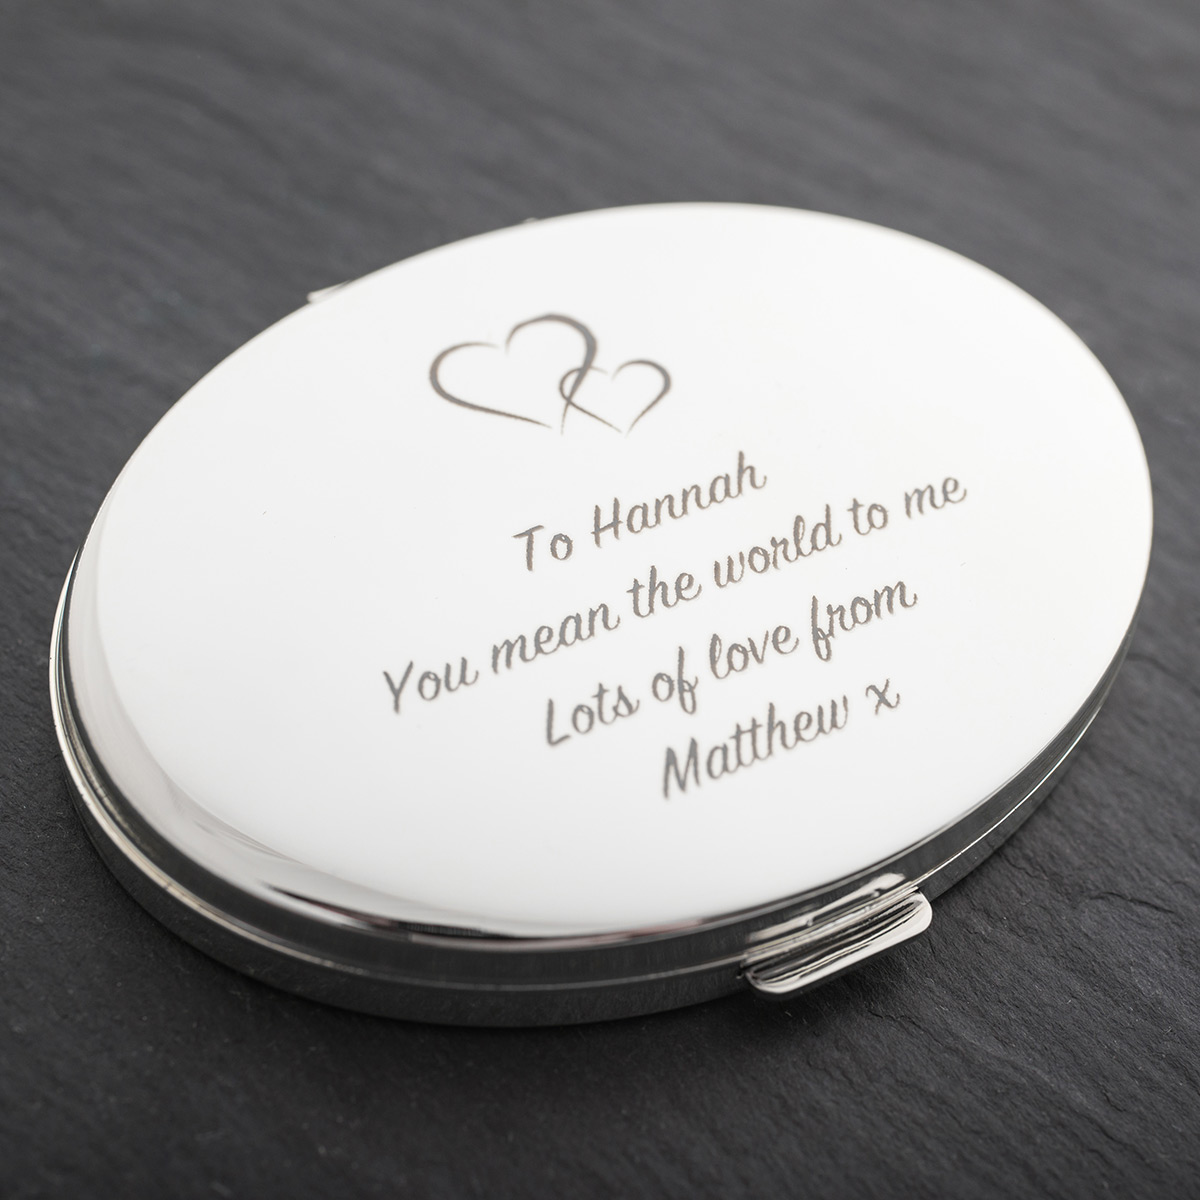 Engraved Silver Oval Compact Mirror With Hearts